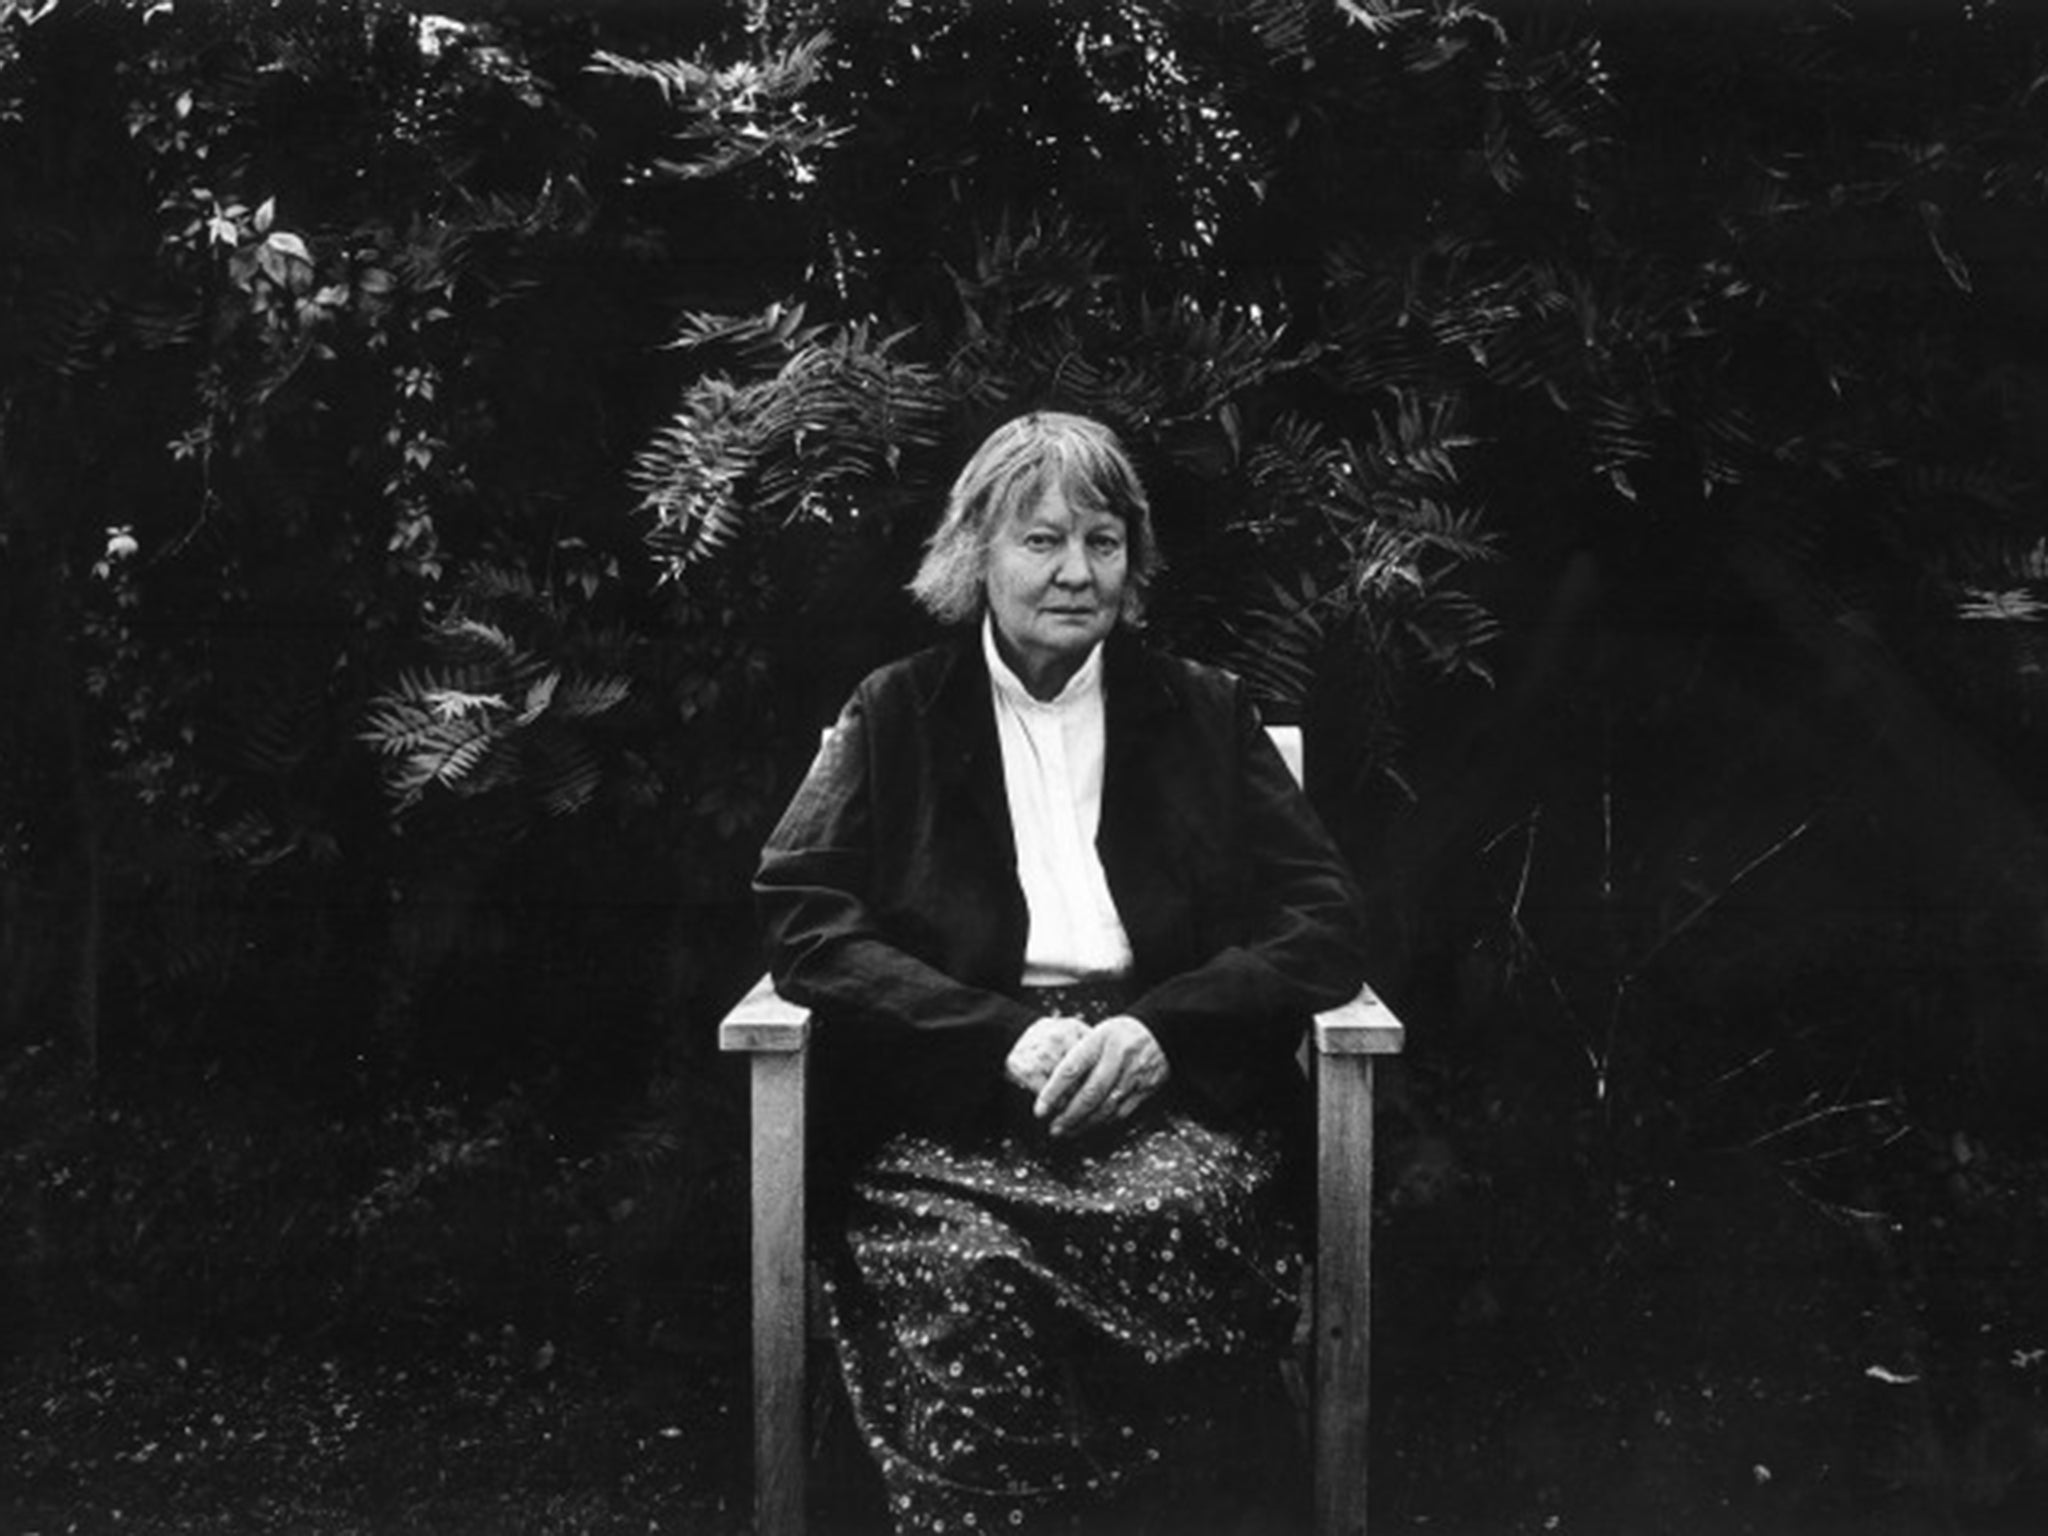 Iris Murdoch wrote novels about the only things that matter – love, goodness and how to be happy without hurting others